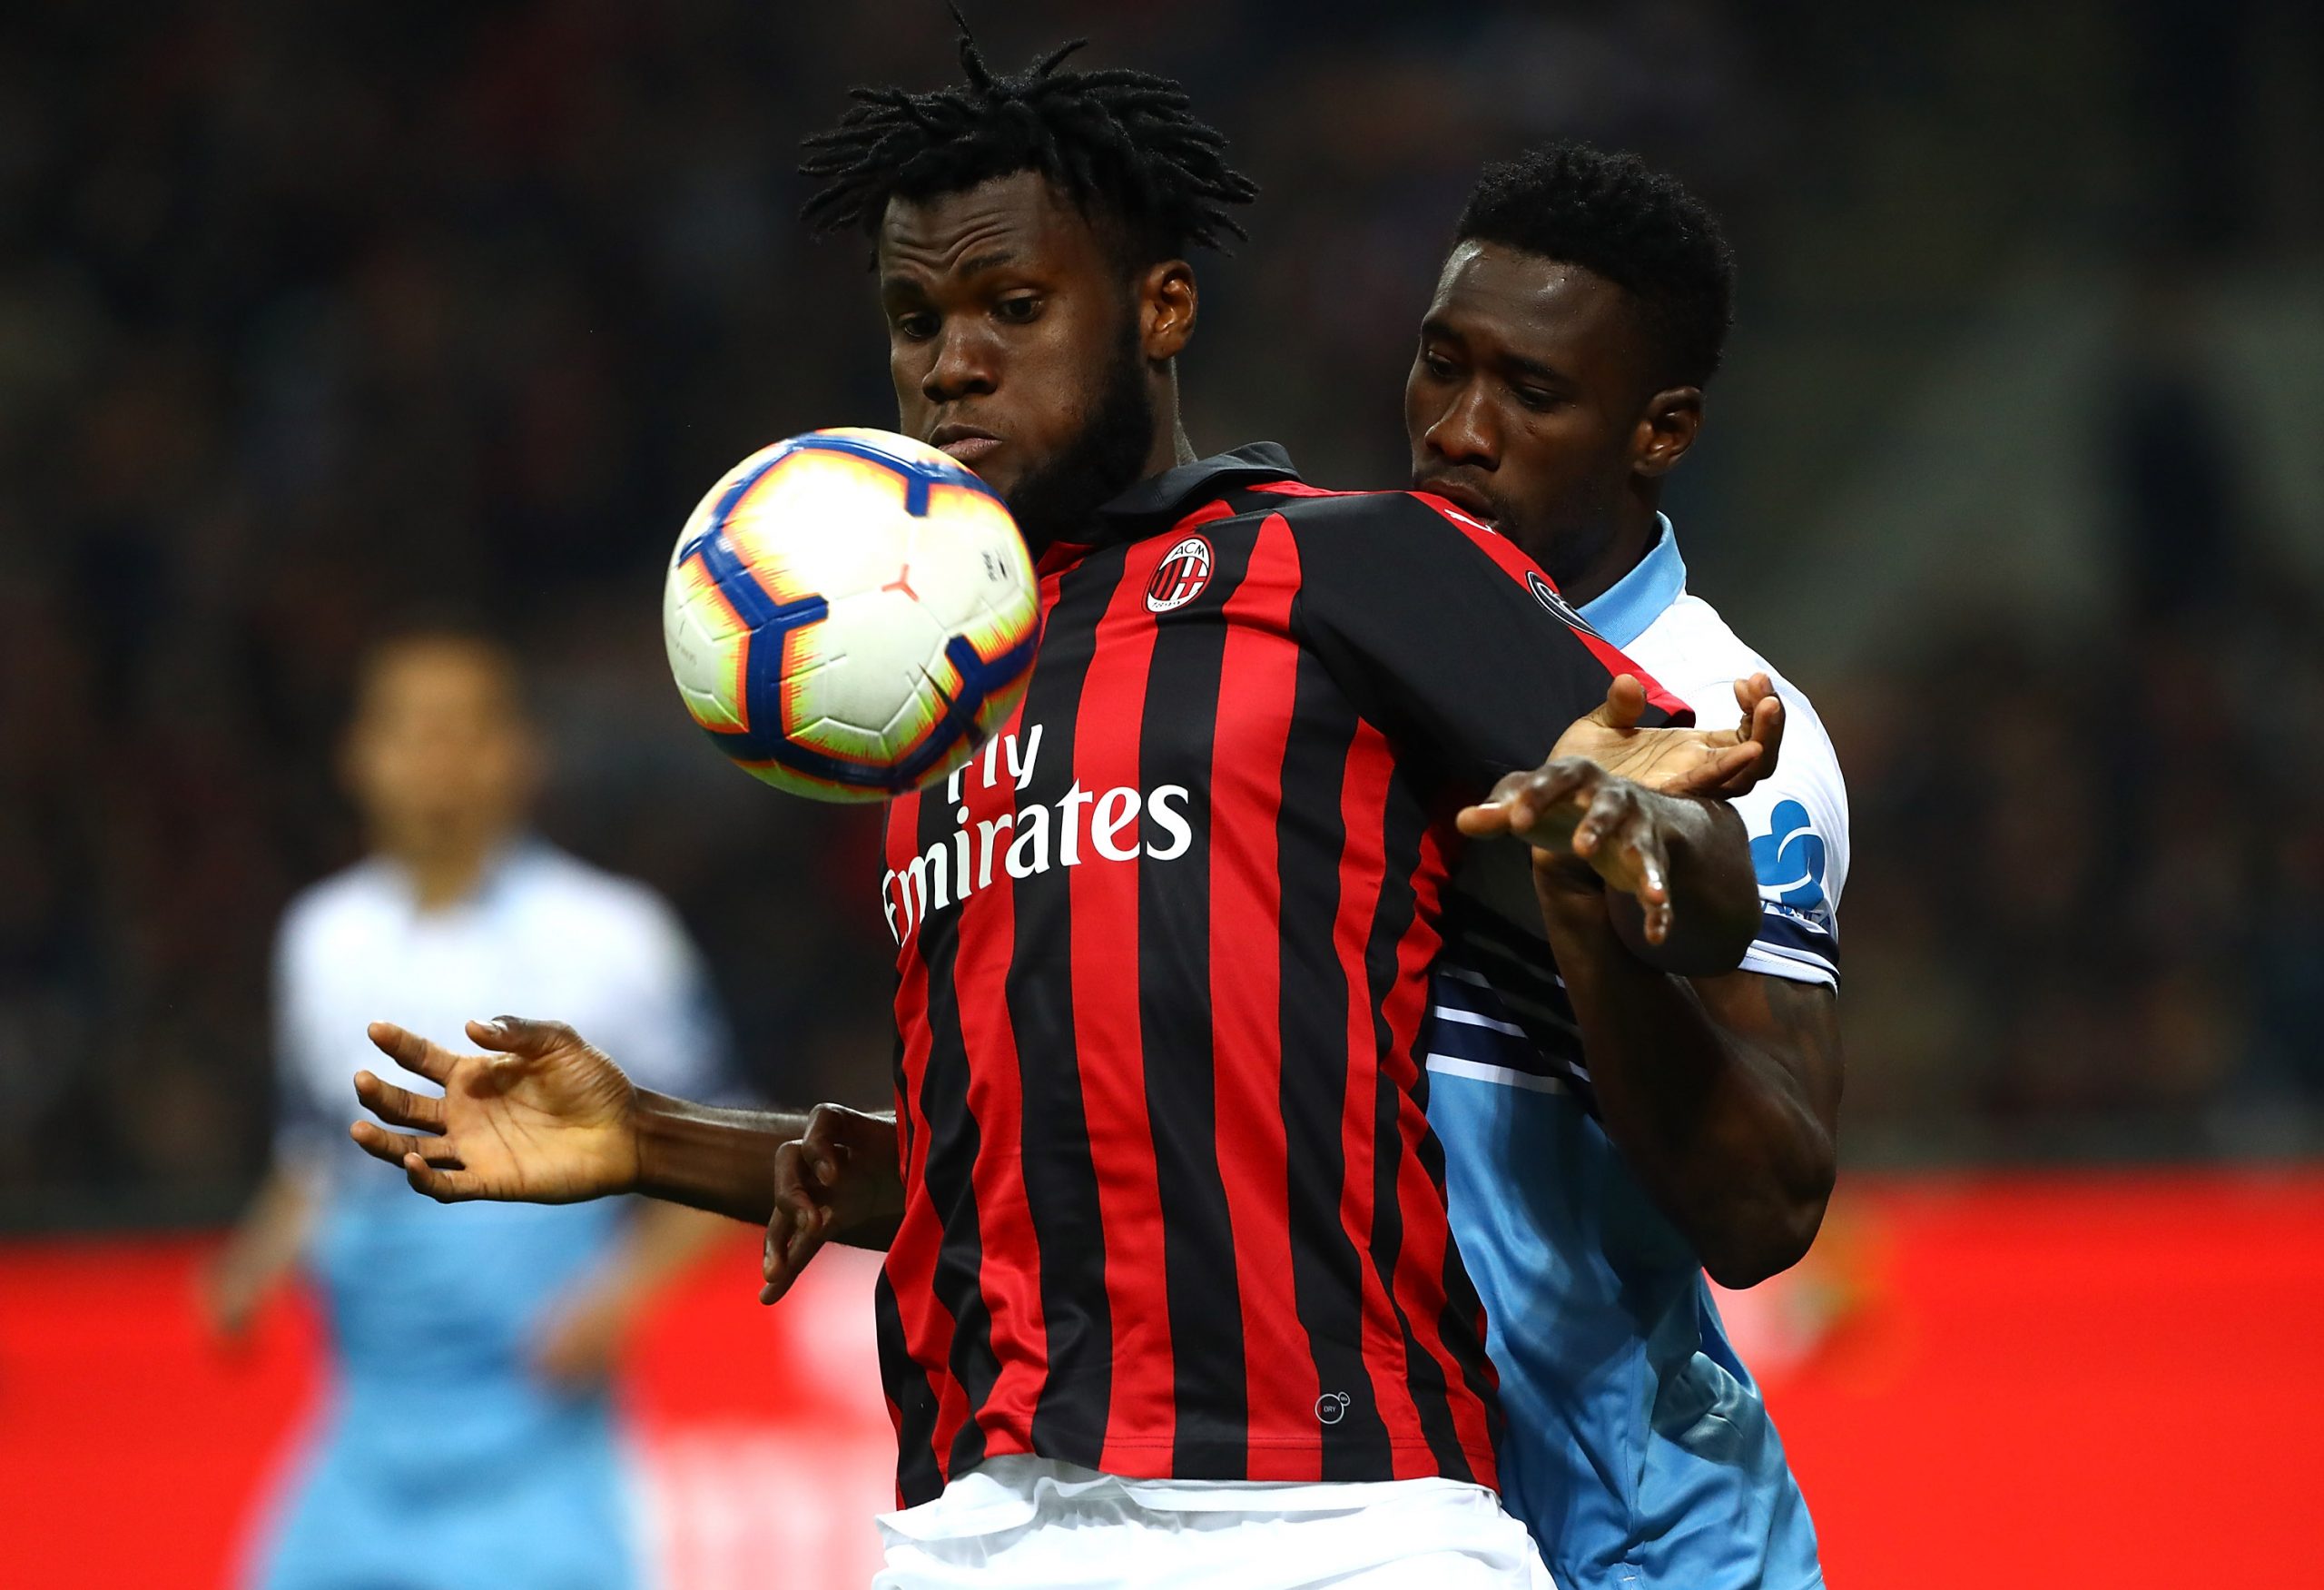 Journalist claims Kessie, who is seen in the photo, could attract interest from Newcastle